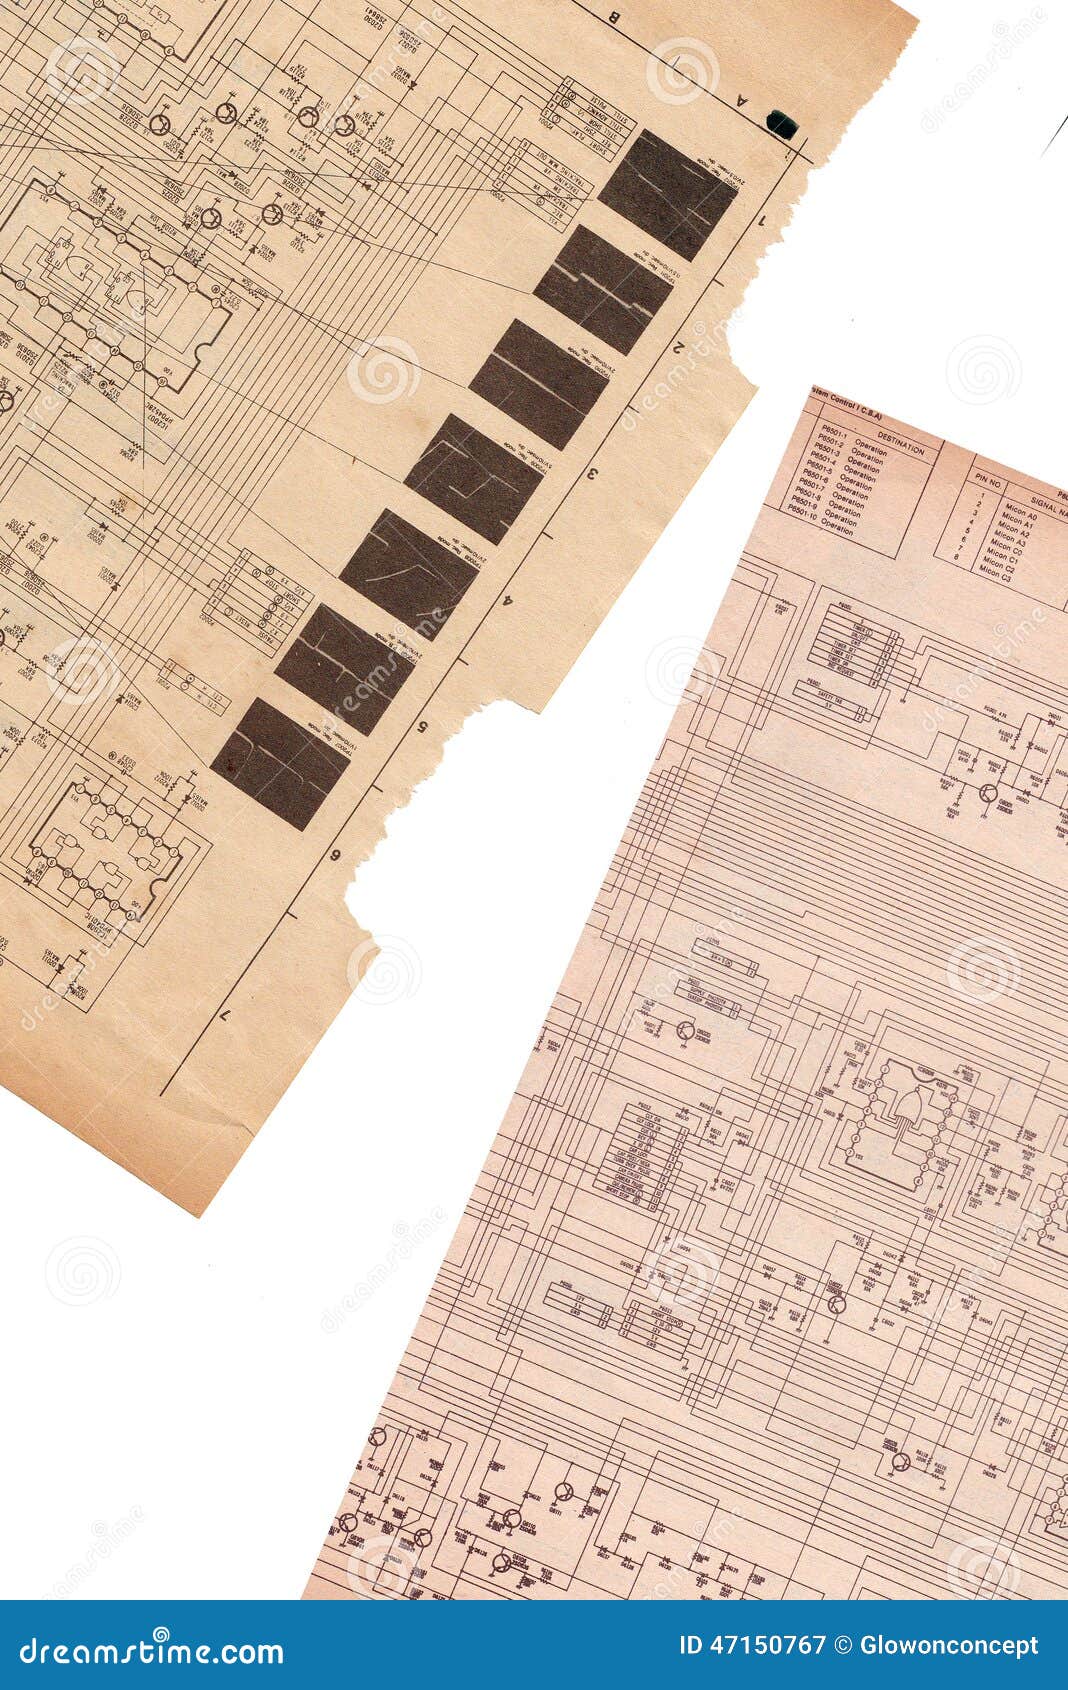 416 Old Blueprint Paper Background Texture Stock Photos - Free &  Royalty-Free Stock Photos from Dreamstime